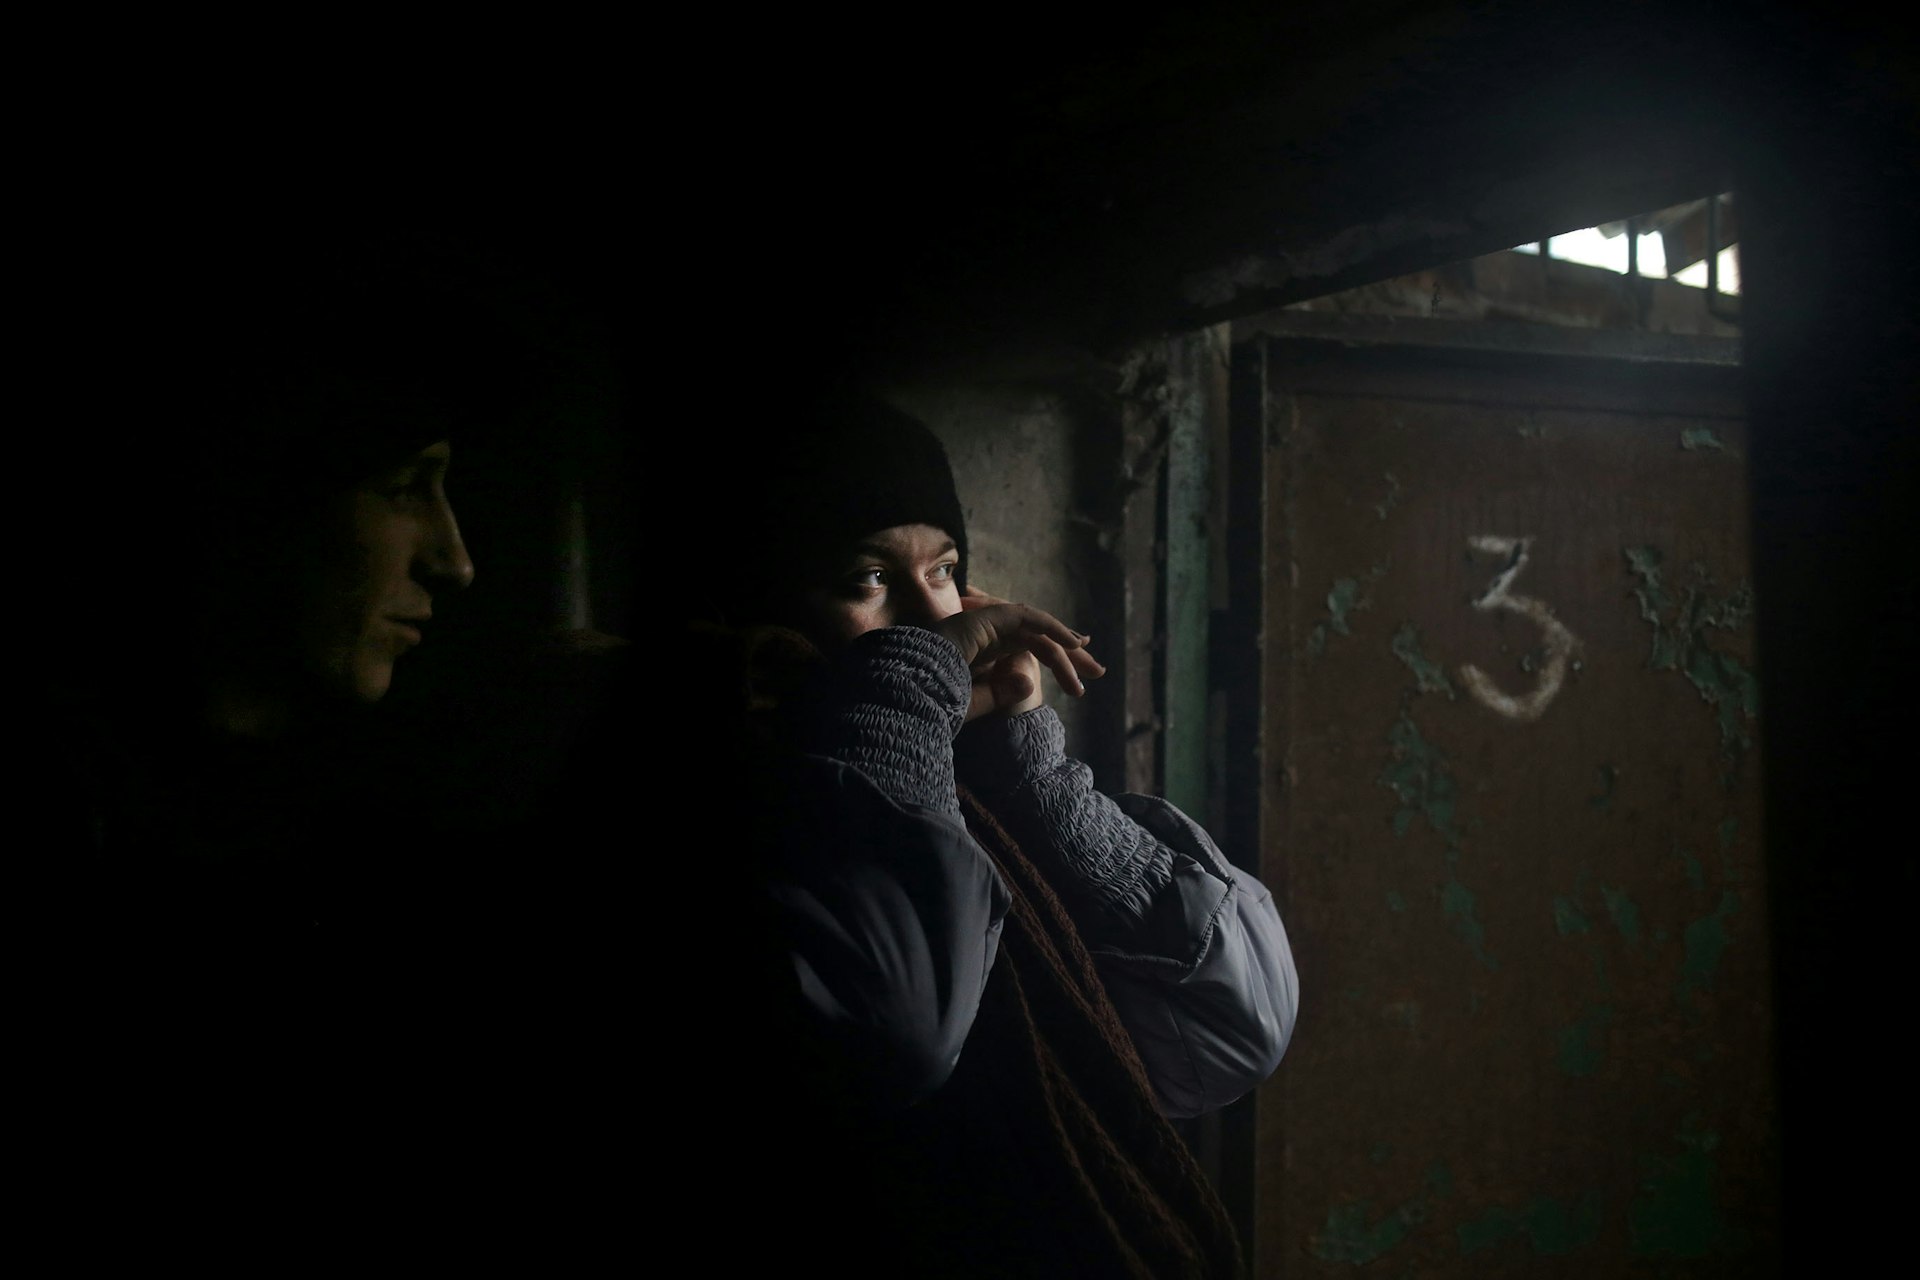 Follow these photographers on Instagram to see the Ukraine conflict unfiltered